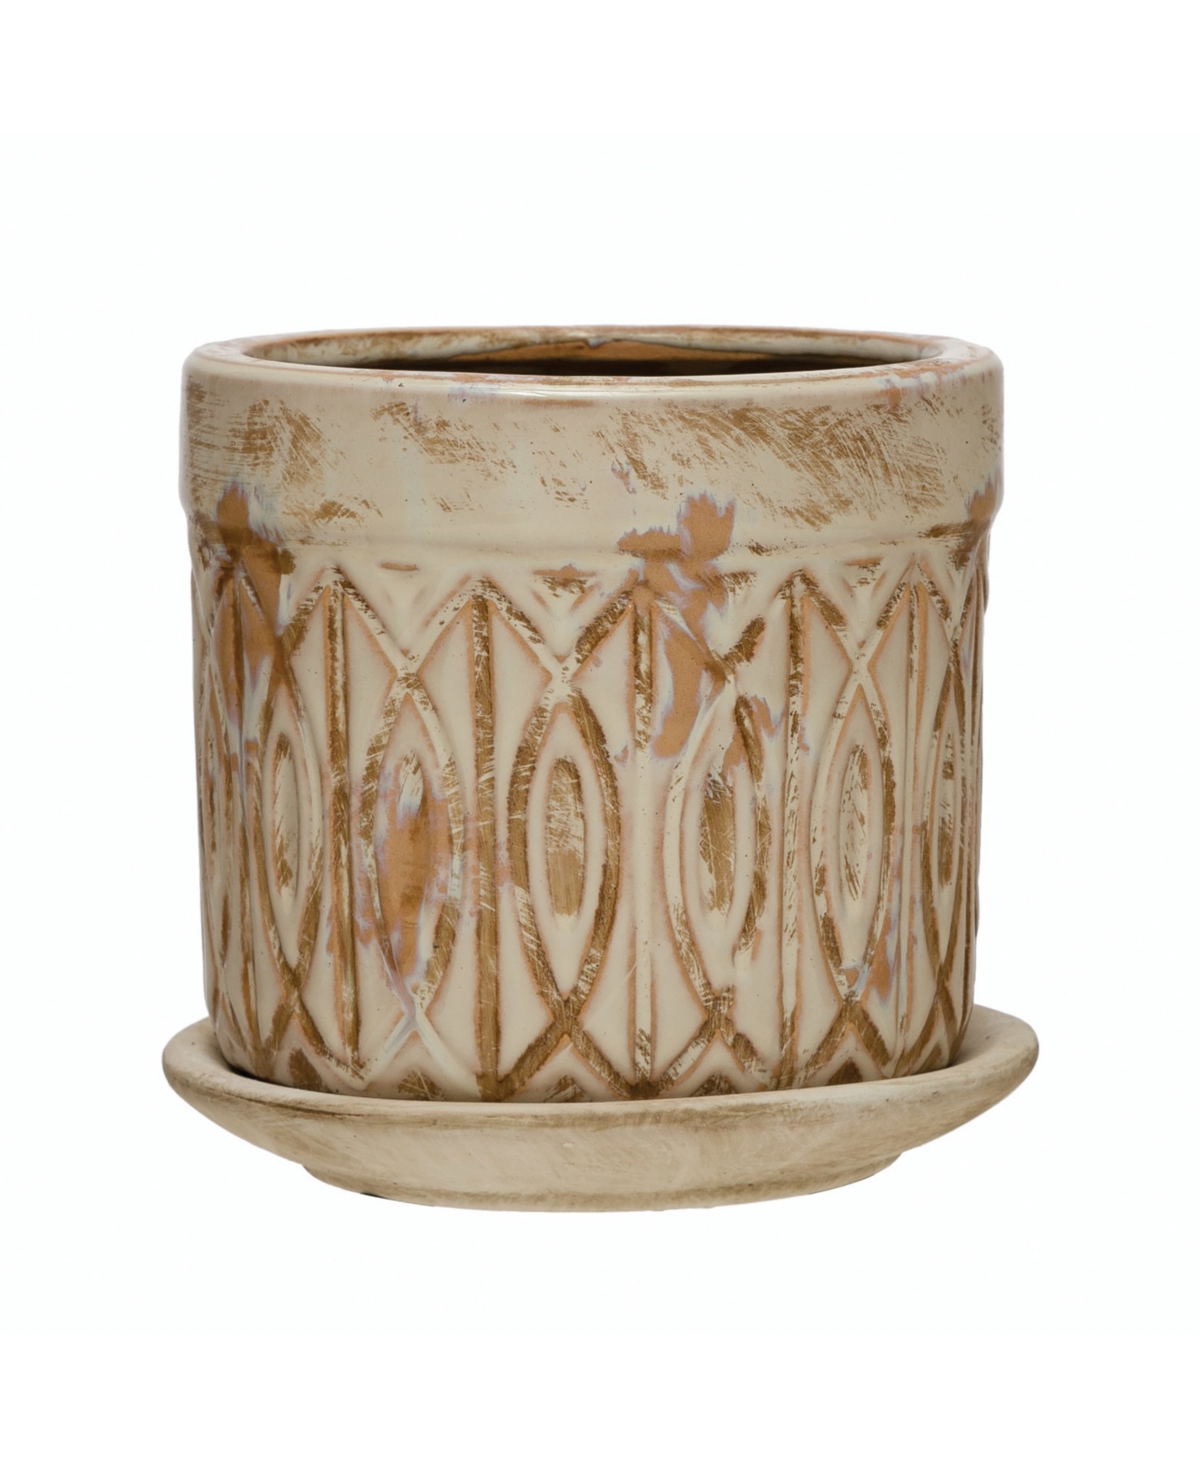 Debussed Terra-Cotta Planter with Pattern and Saucer - Greige